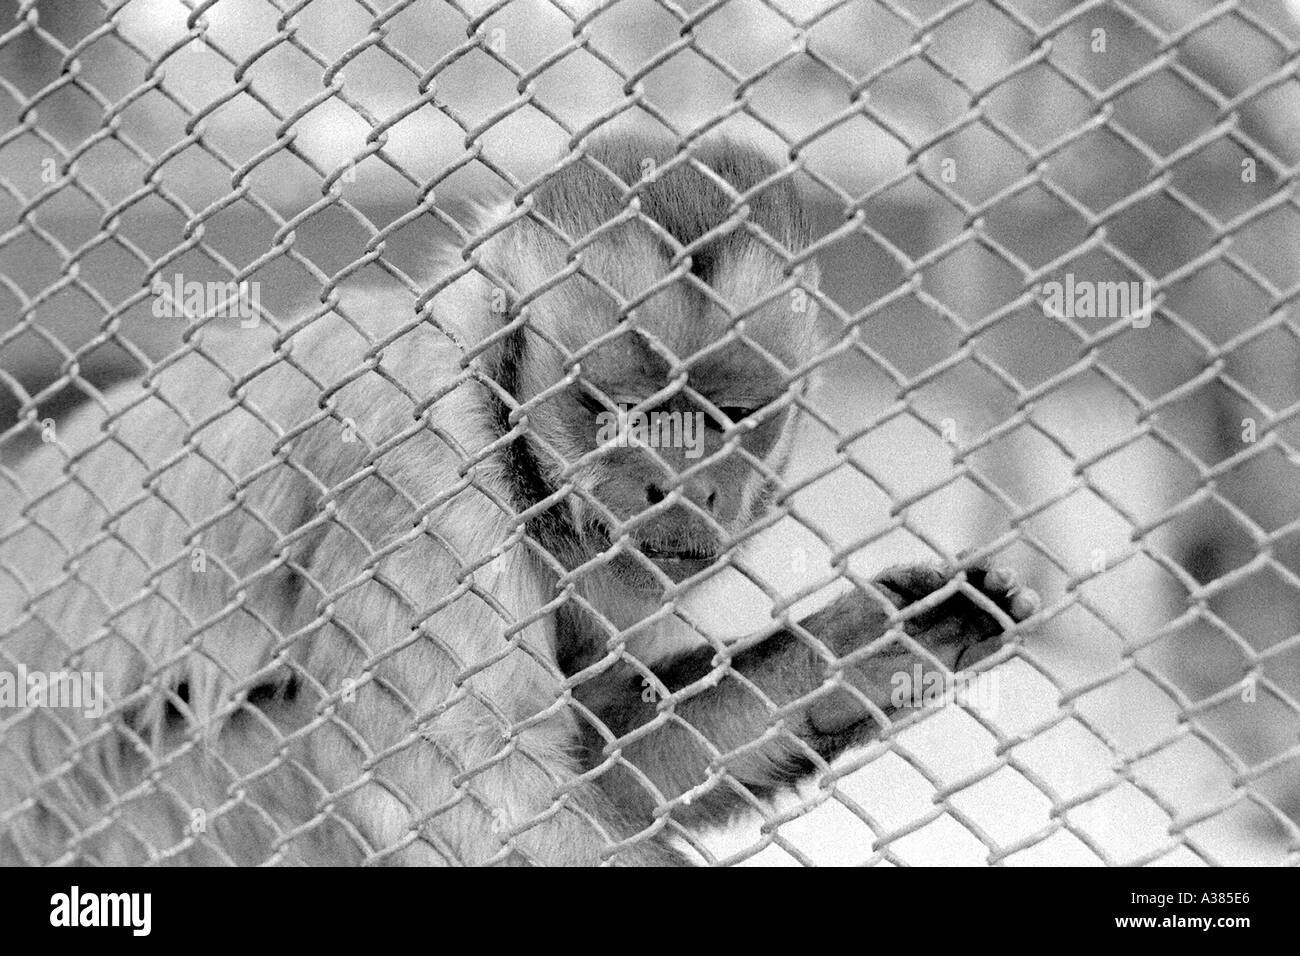 Capuchin Monkey In a Cage Stock Photo